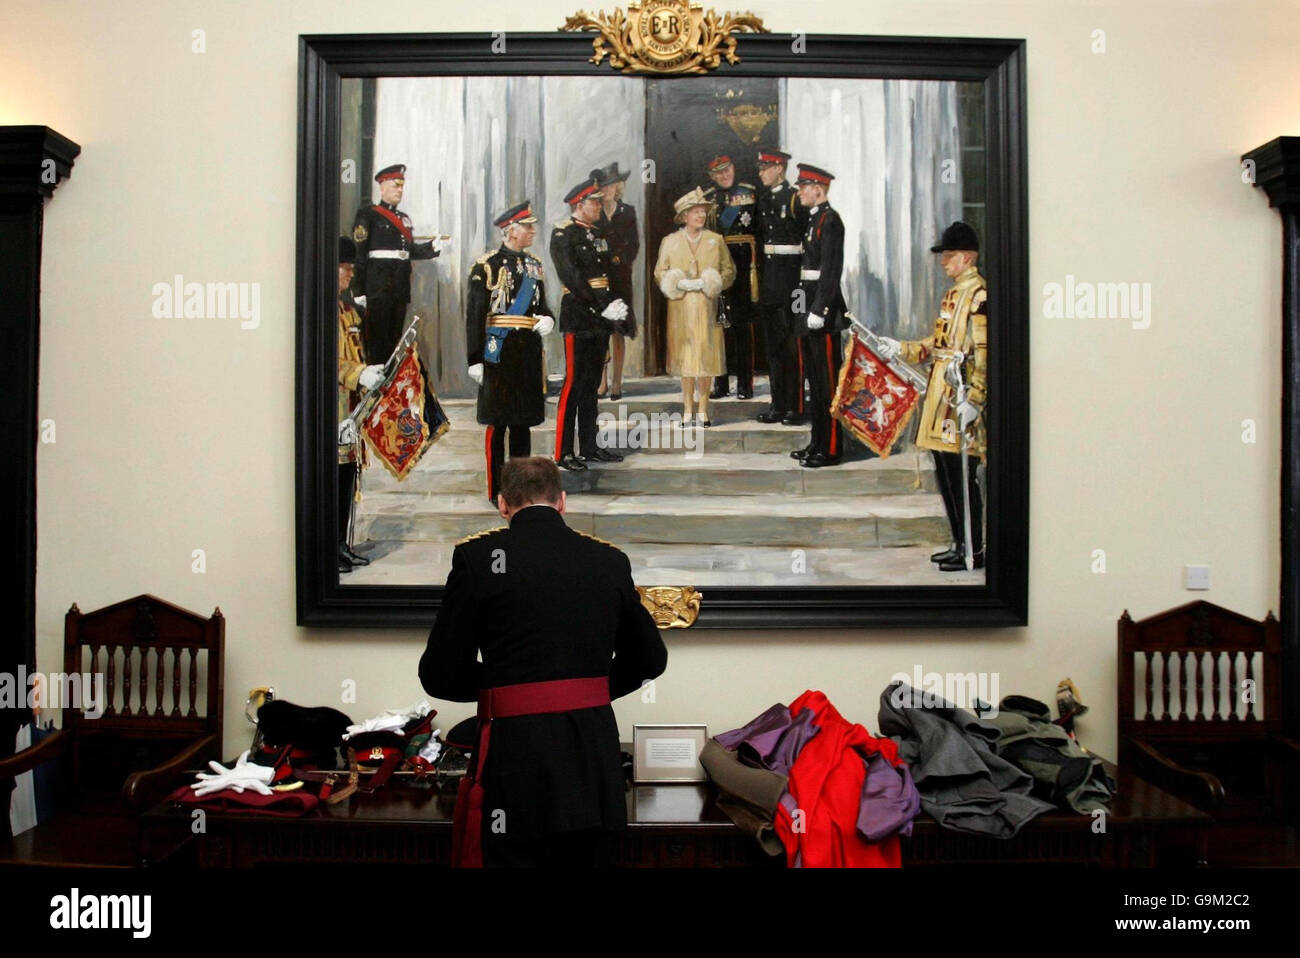 A group portrait of the Royal Family commemorating the commissioning of Prince Harry into the British Army by artist Sergei Pavlenko, hangs on the wall at Sandhurst. Stock Photo